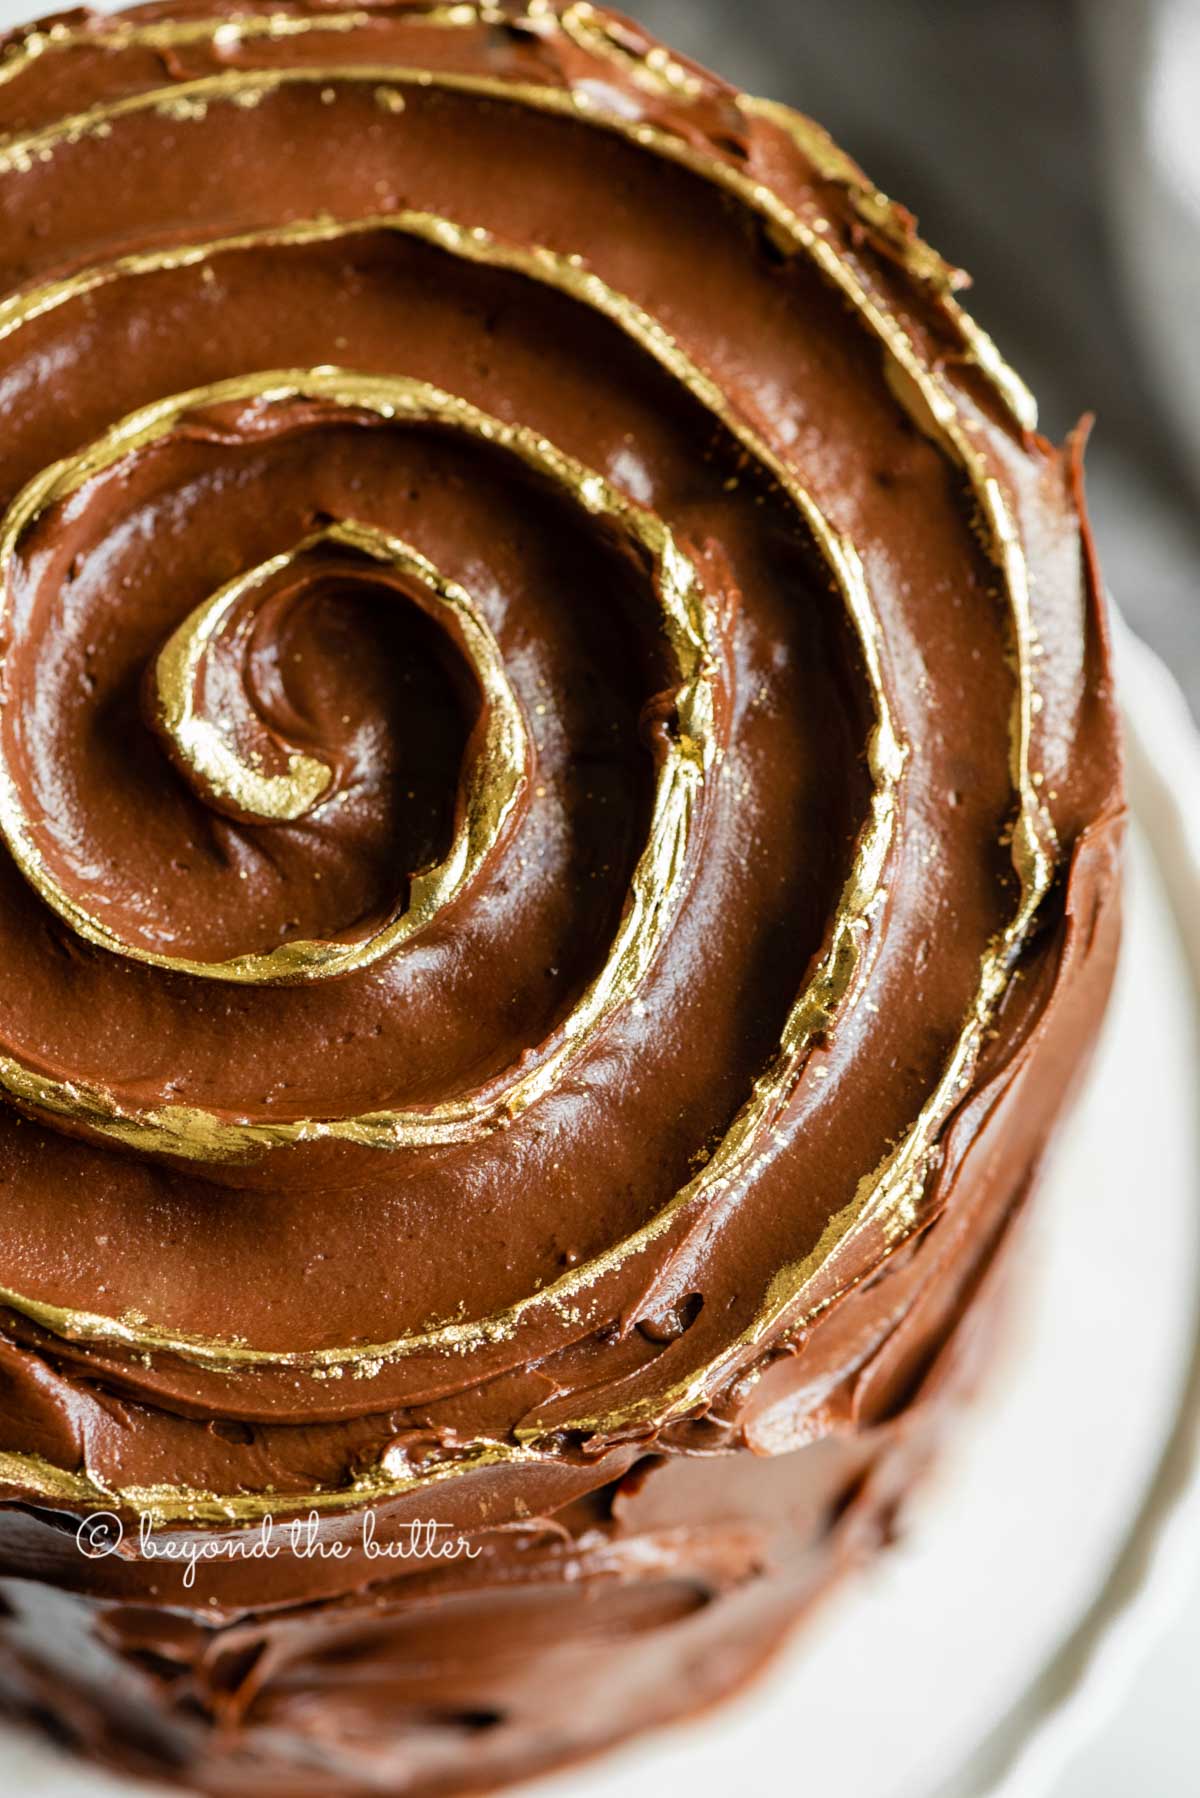 Angled closeup image of chocolate zucchini cake with gold decorative swirl on top | All Images © Beyond the Butter™